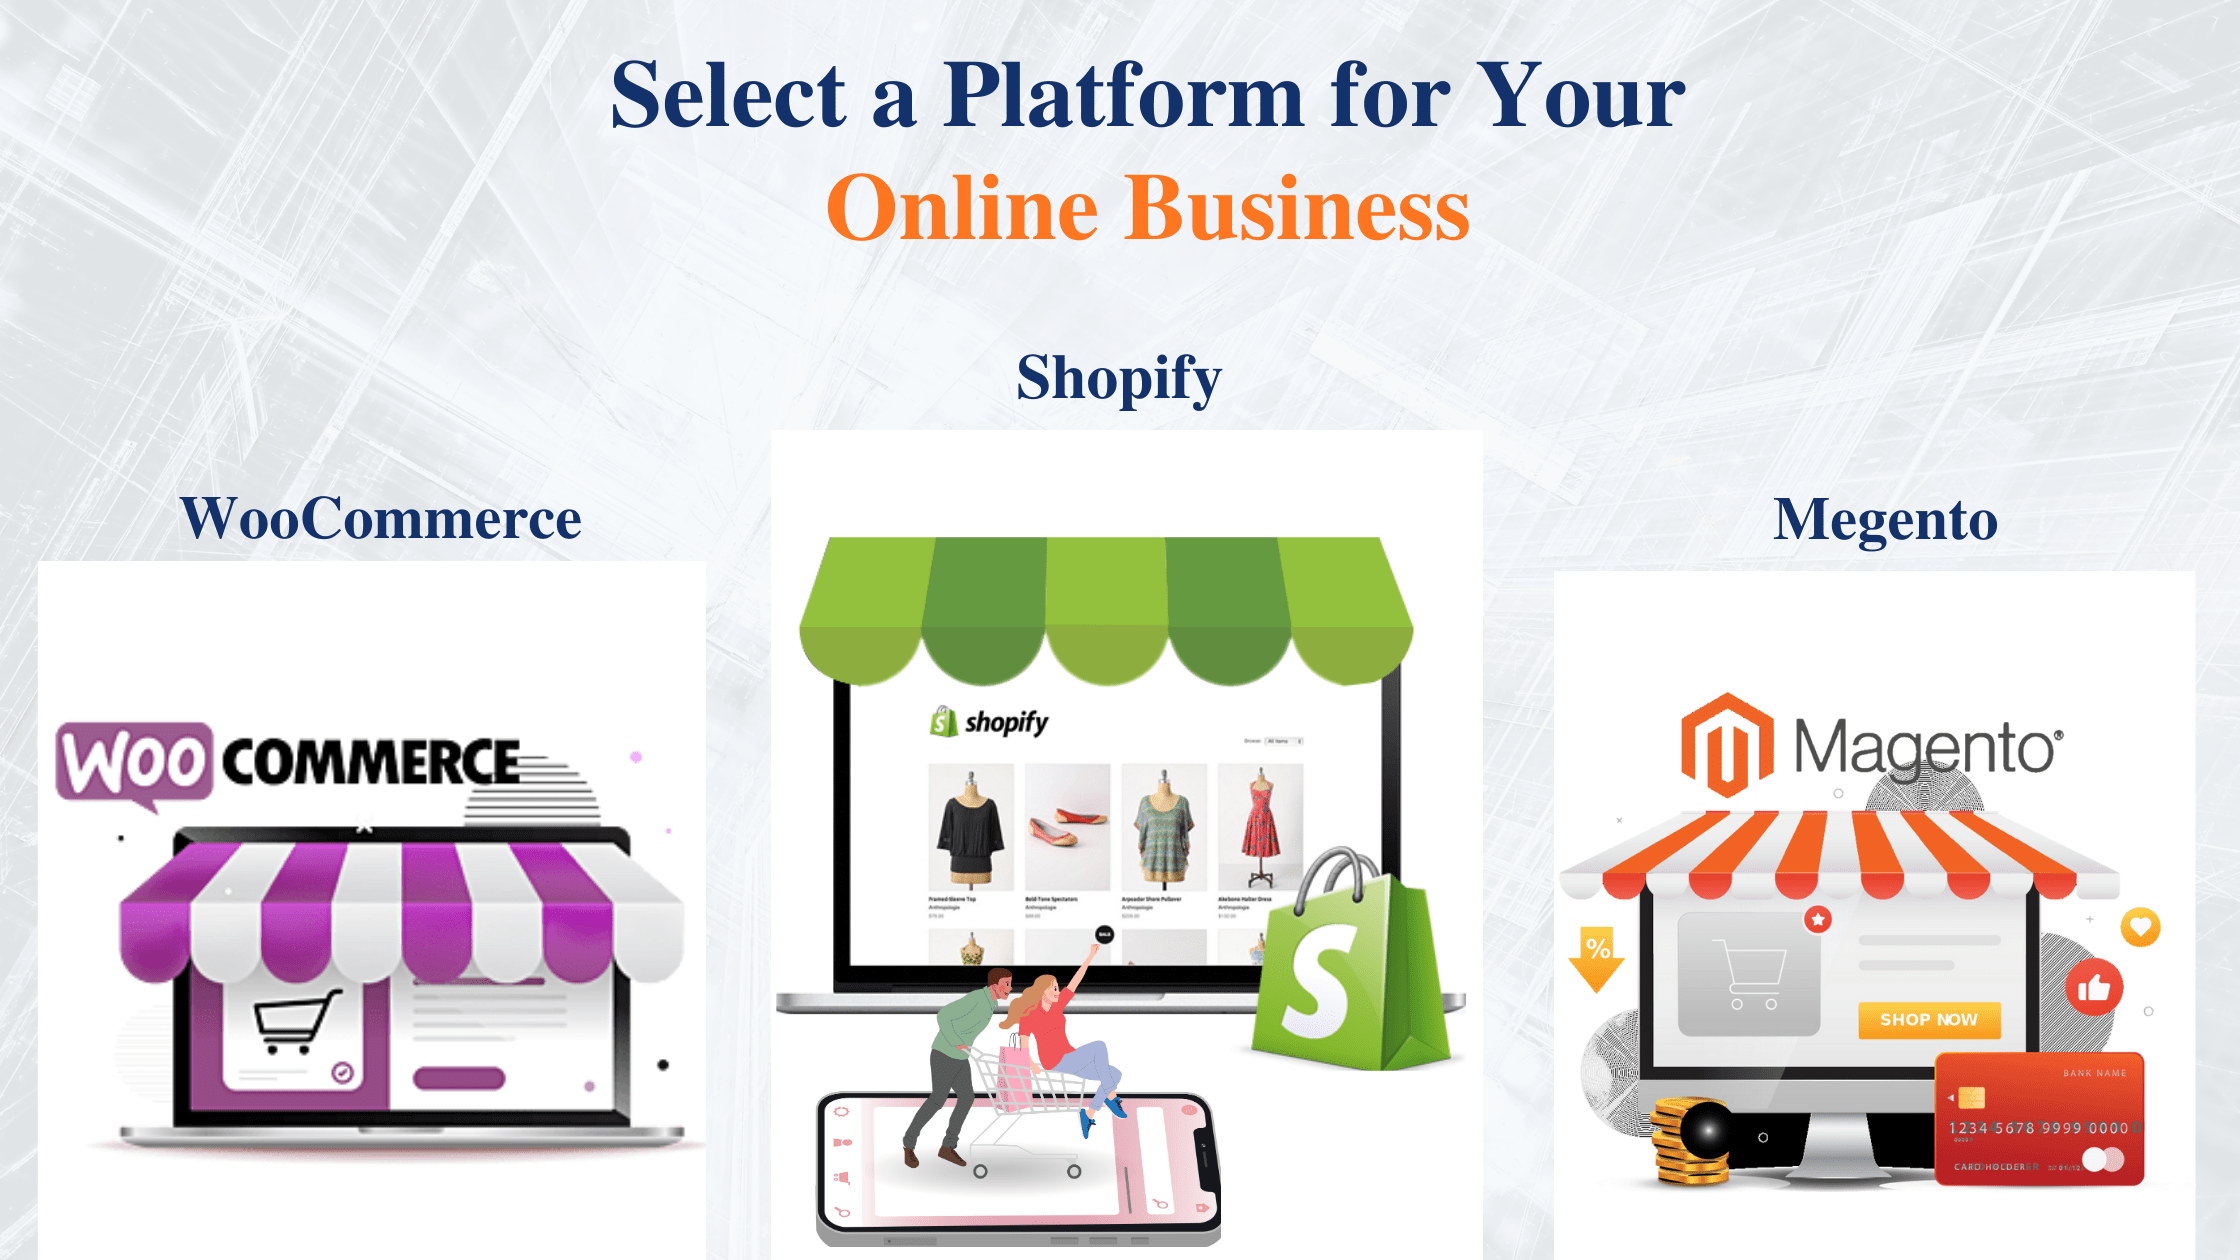 Select a Platform for Your Online Business